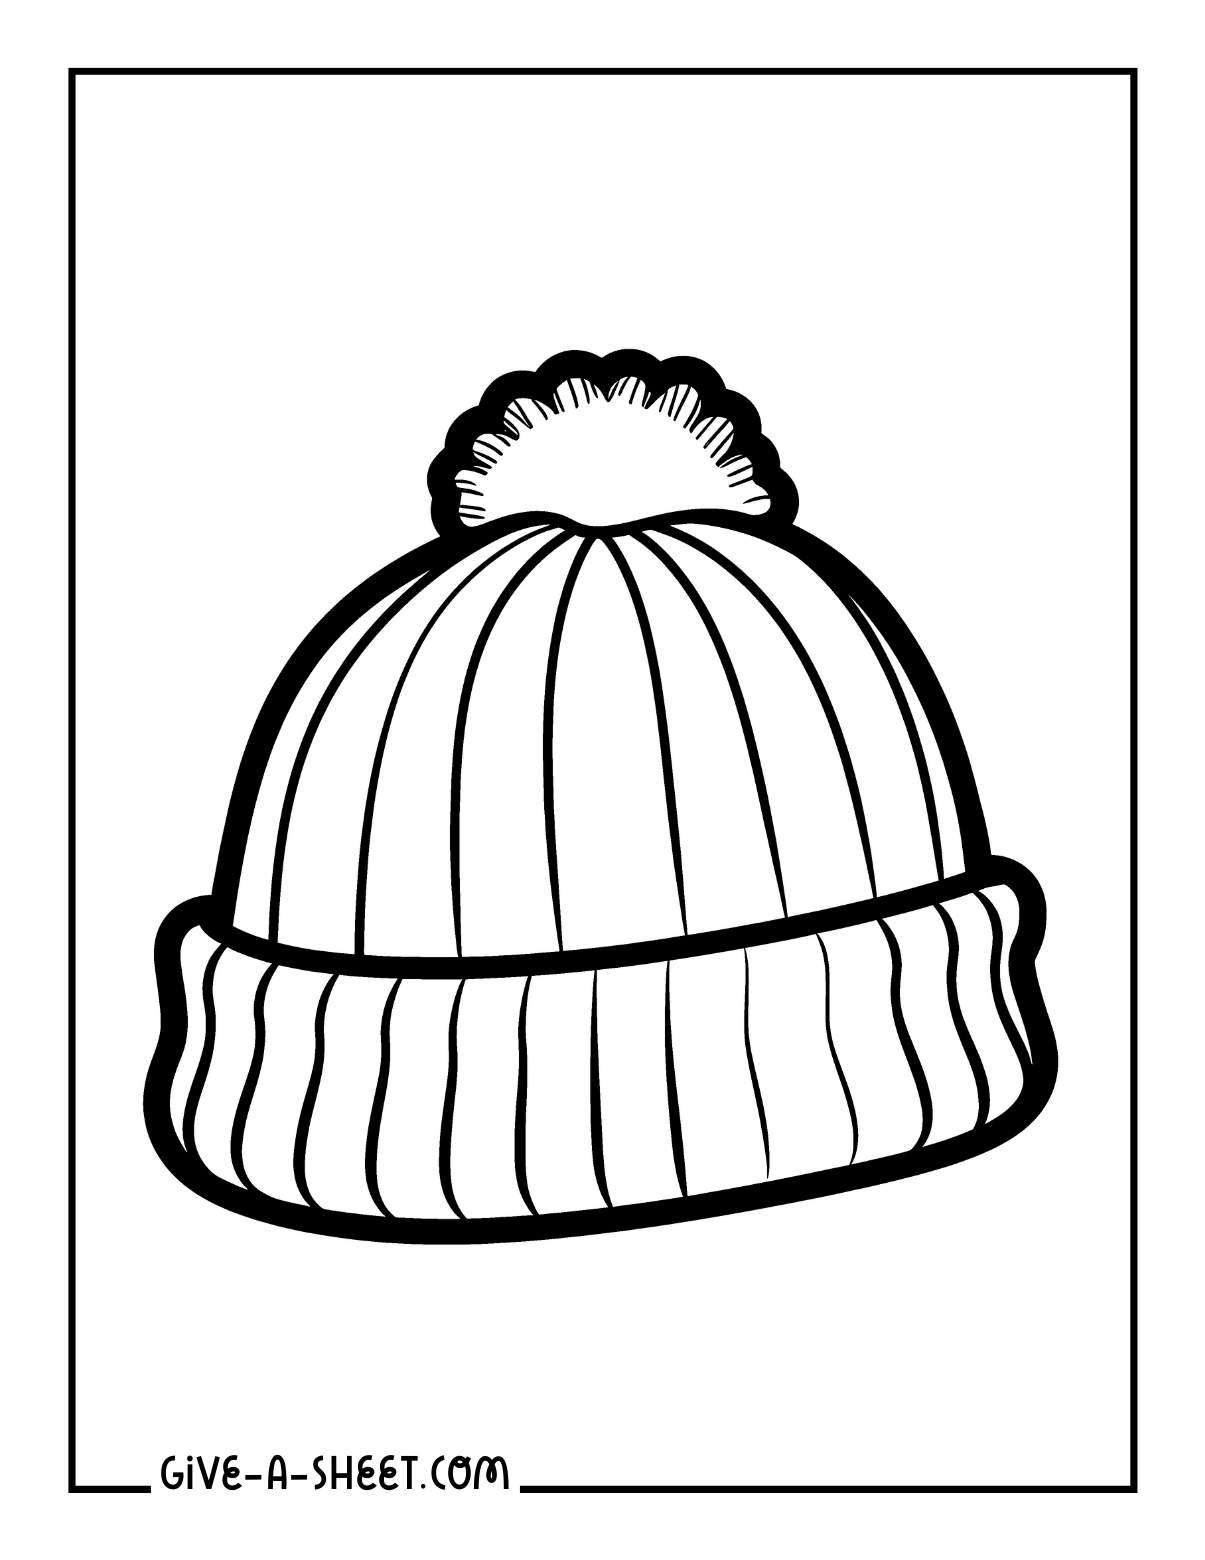 Simple winter hat outlines to color for kids.